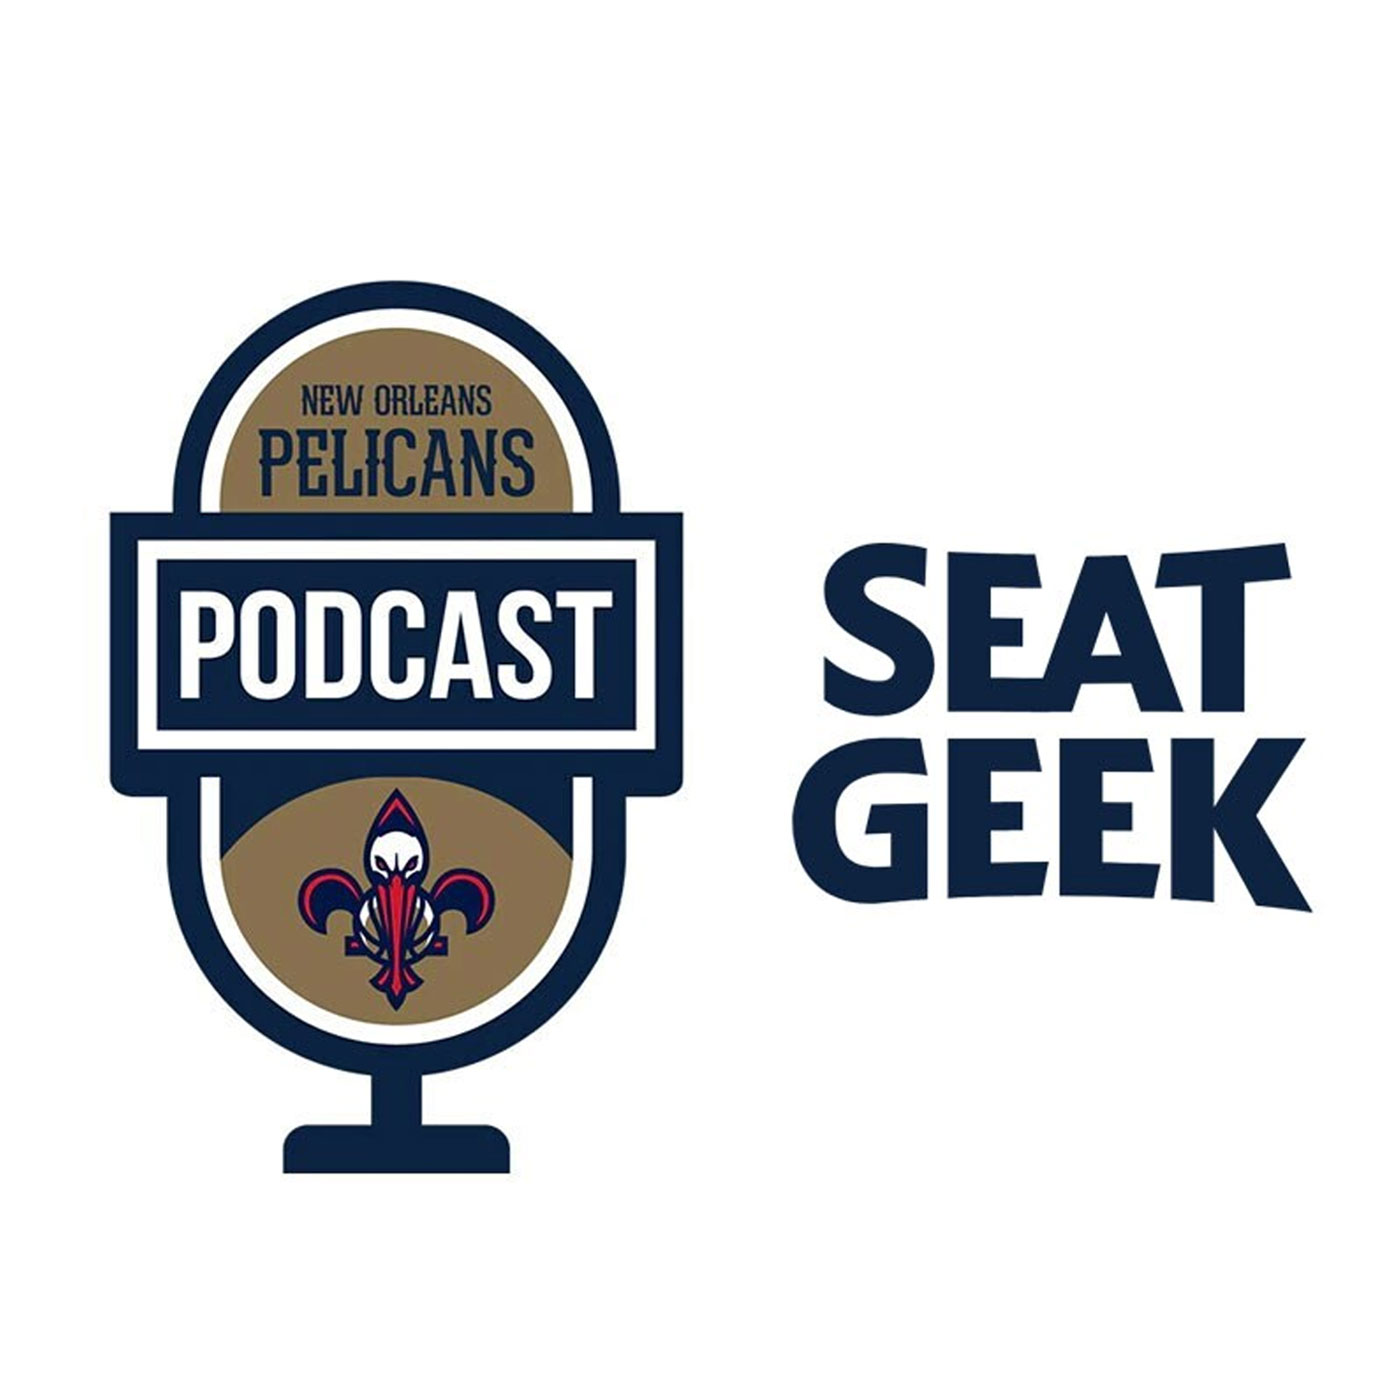 Devonte' Graham Player Recap on the New Orleans Pelicans Podcast presented by SeatGeek - May 24, 2022